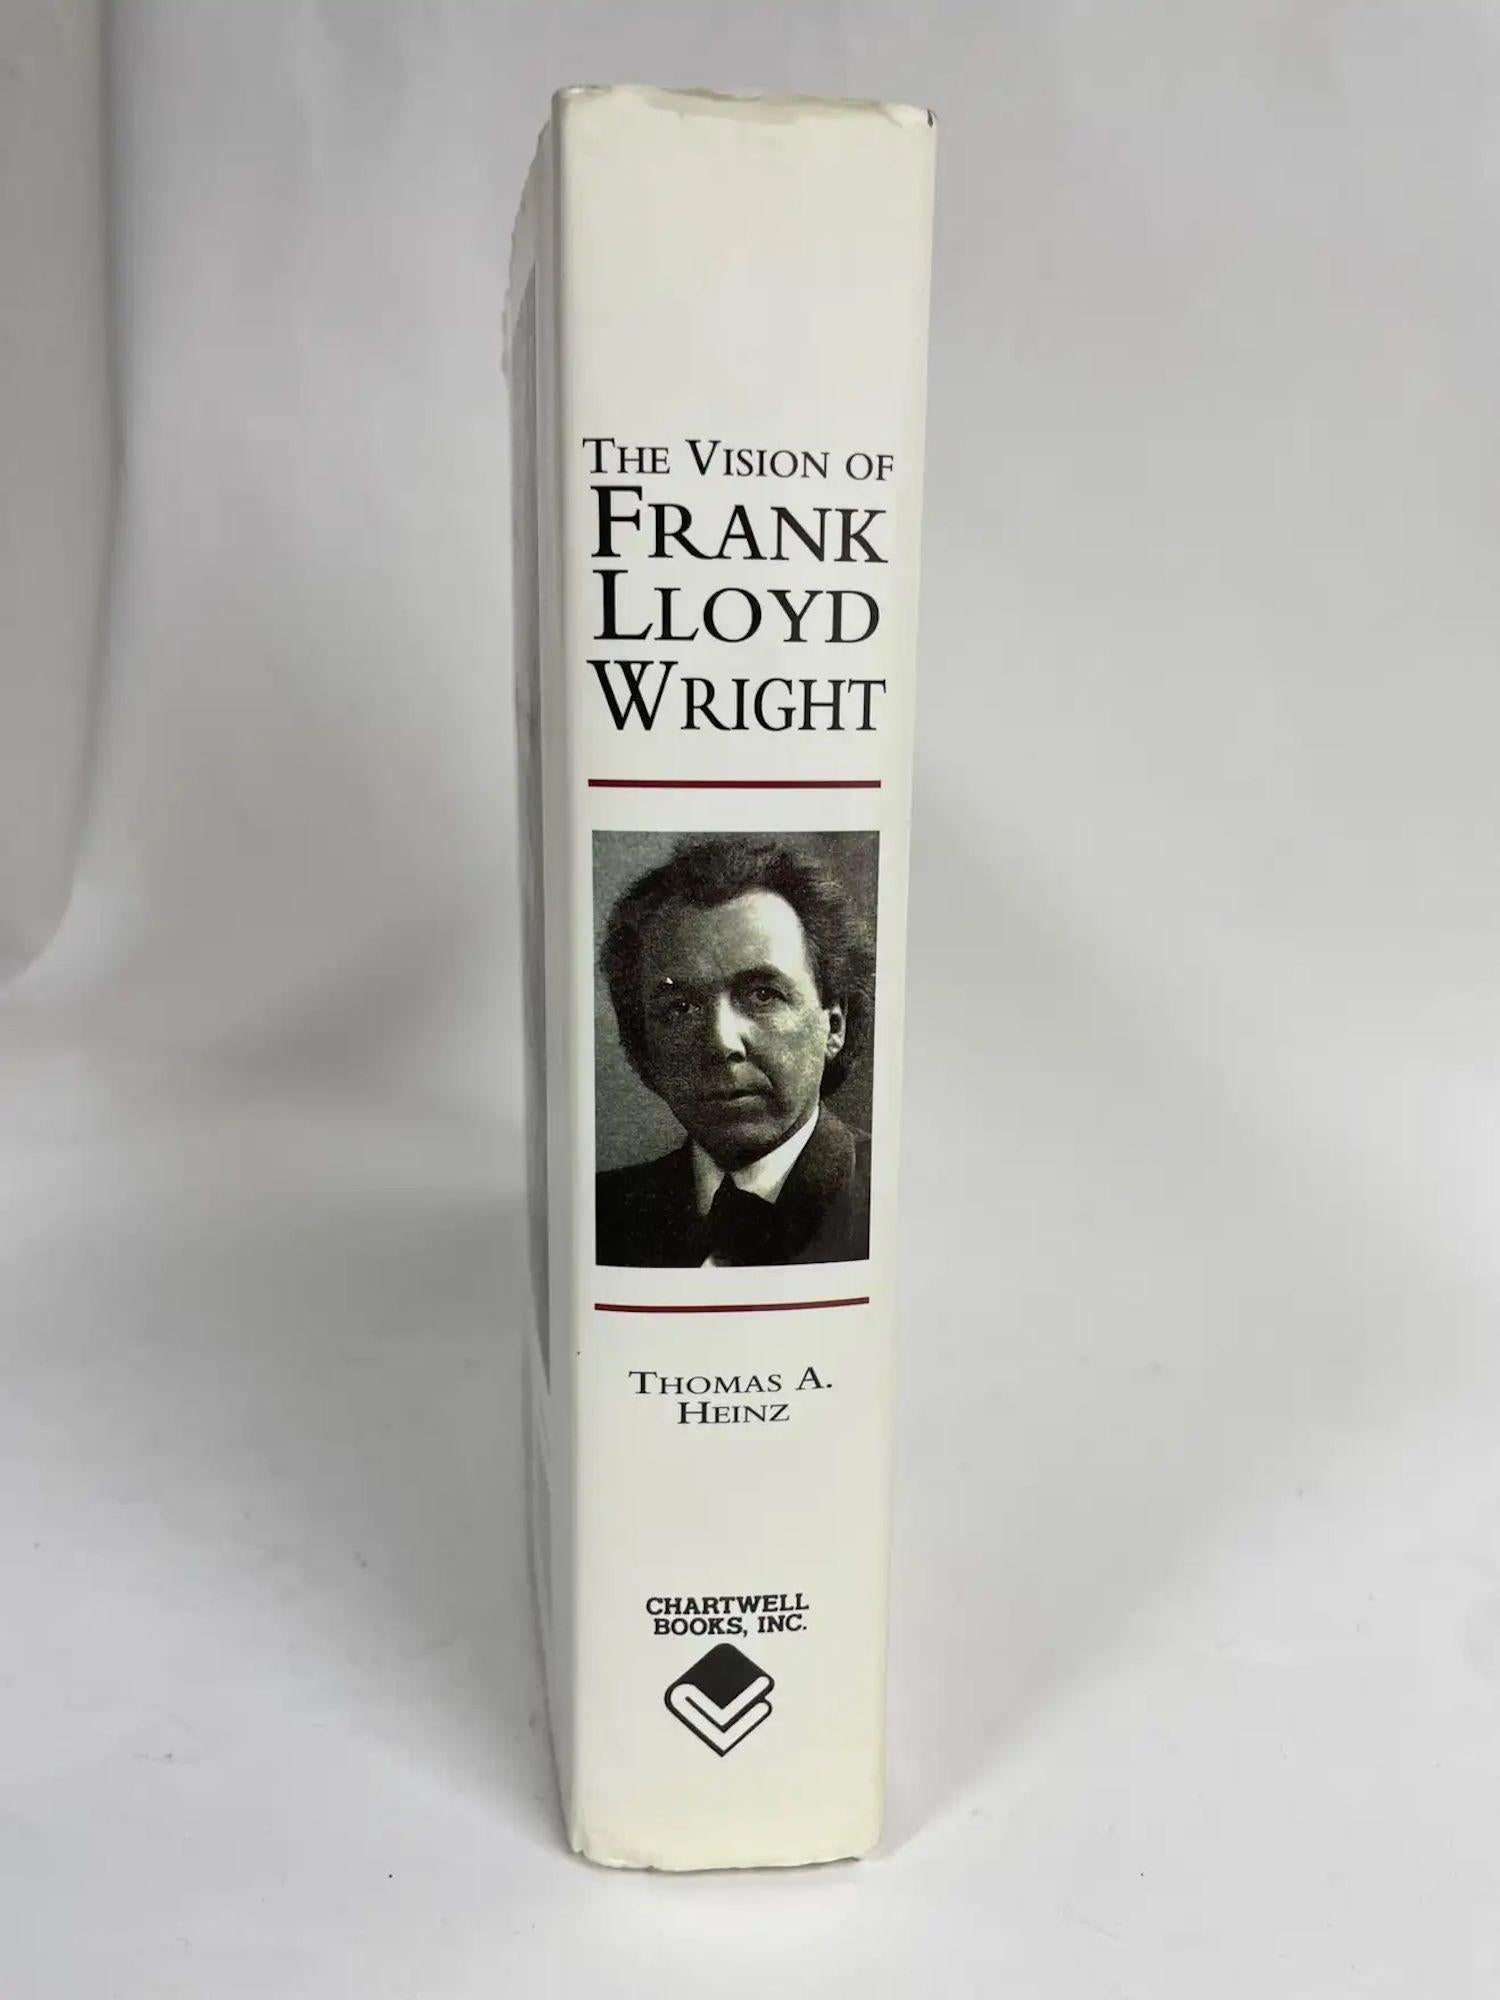 Vision of Frank Lloyd Wright by Thomas a. Heinz Hardcover Book 1st Edition For Sale 3